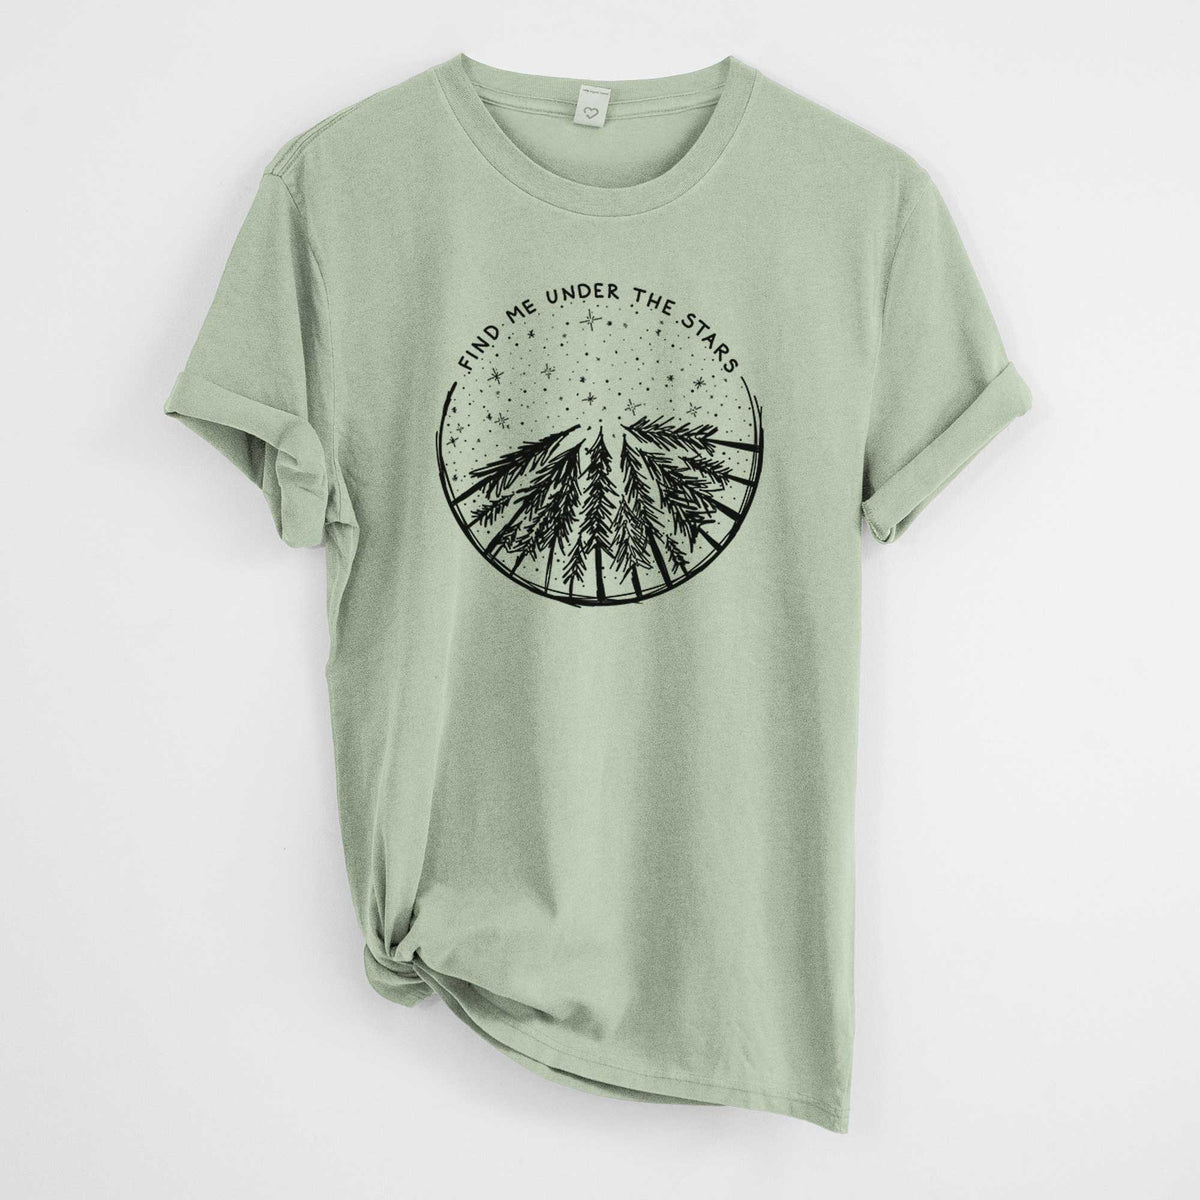 Find Me Under the Stars -  Mineral Wash 100% Organic Cotton Short Sleeve